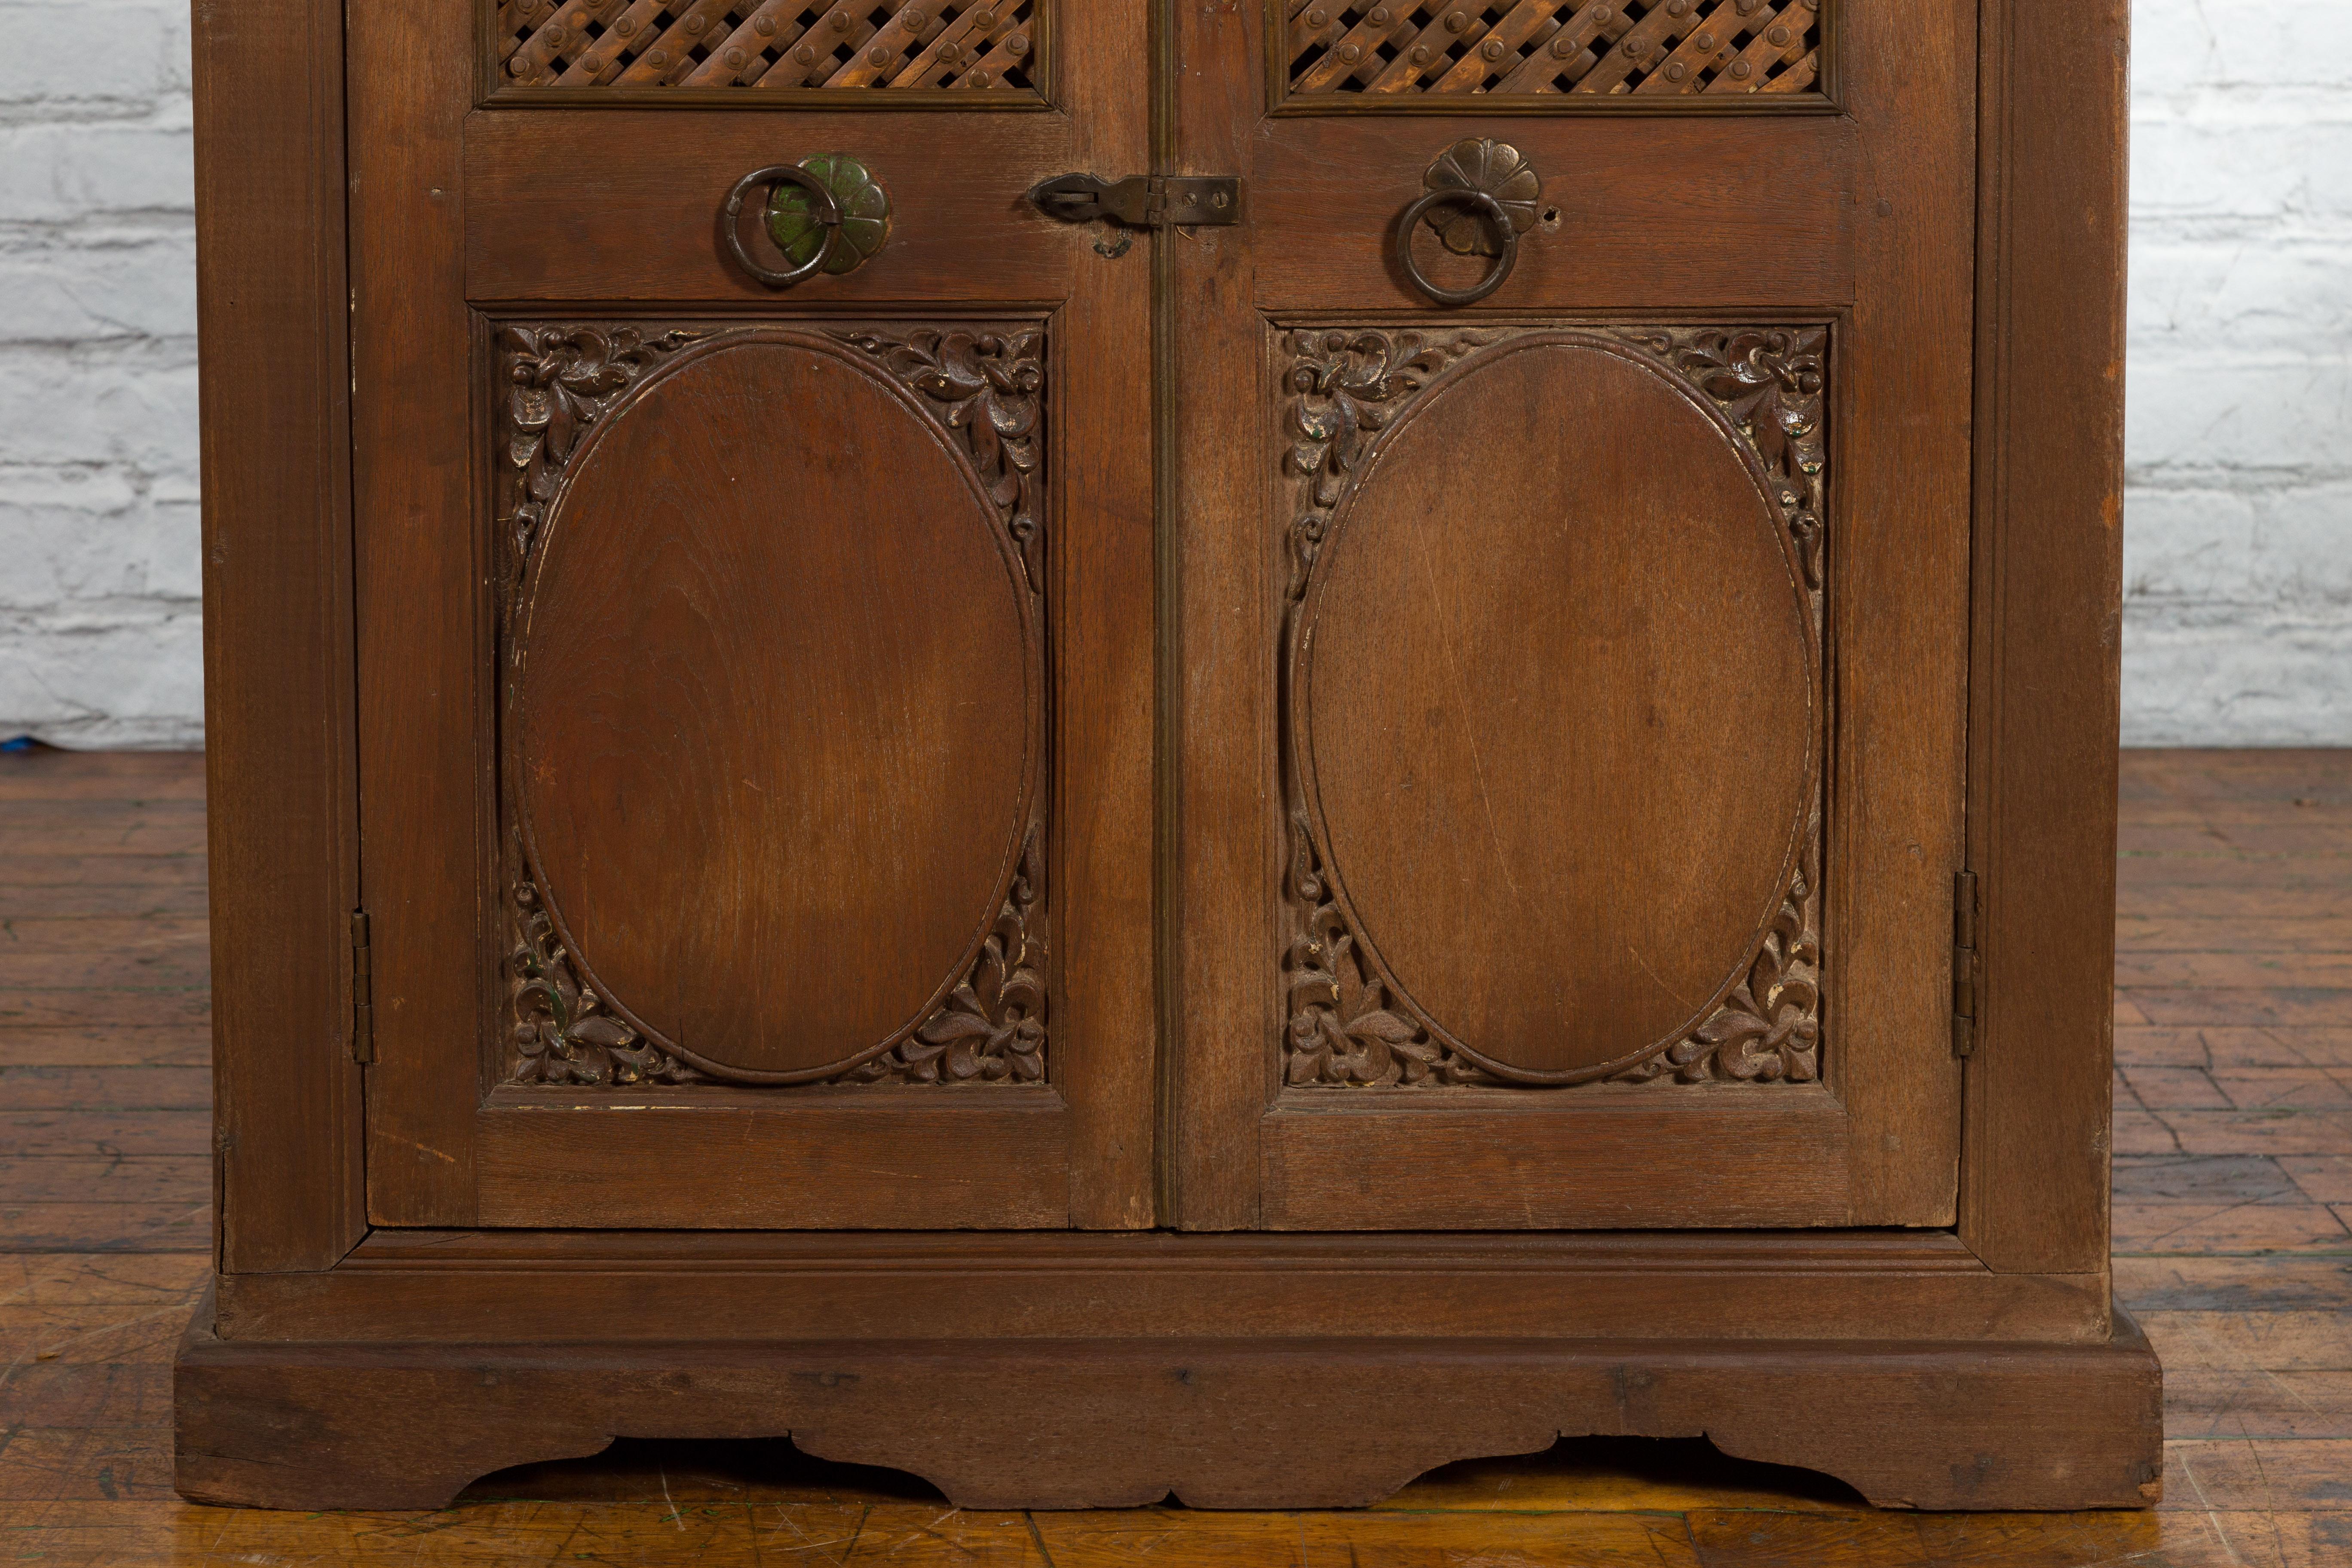 Indian Vintage Wooden Cabinet with Lattice Motifs and Carved Panels For Sale 2